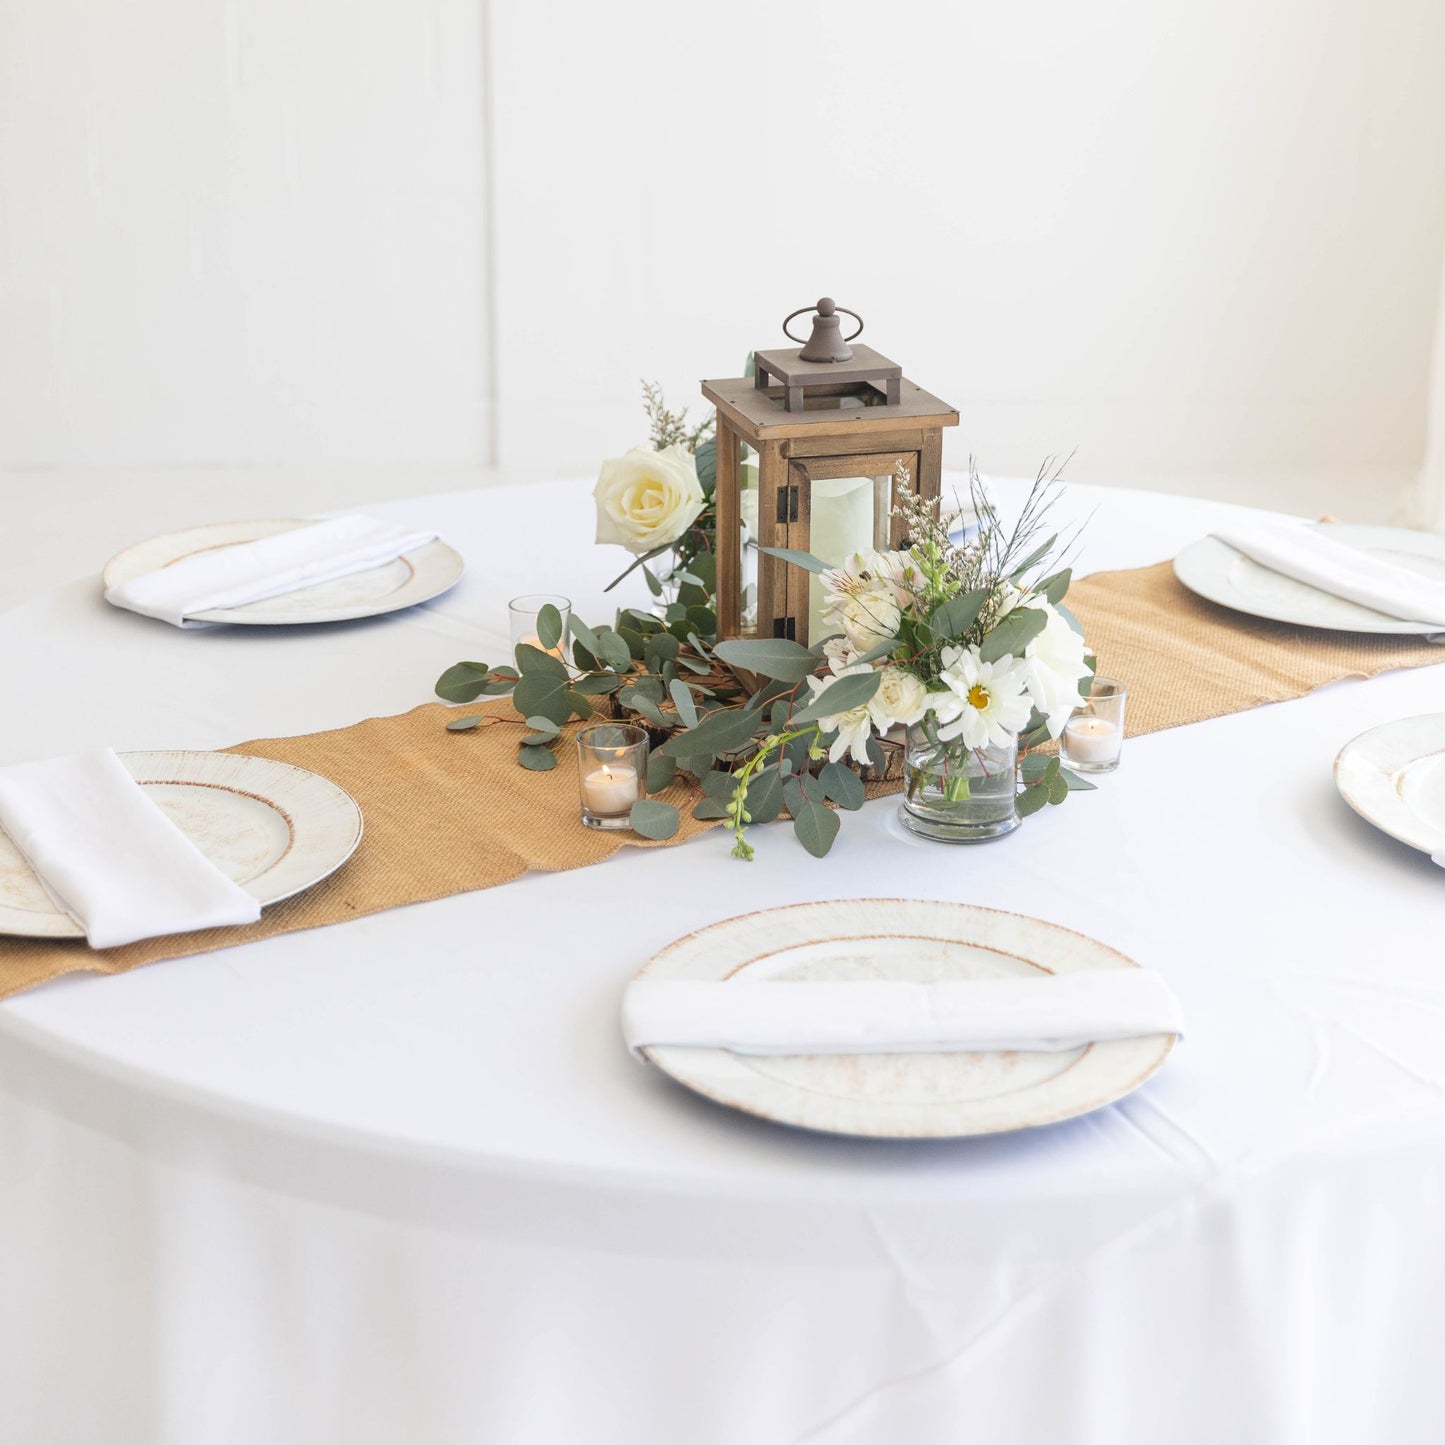 Rustic Chic Table Set